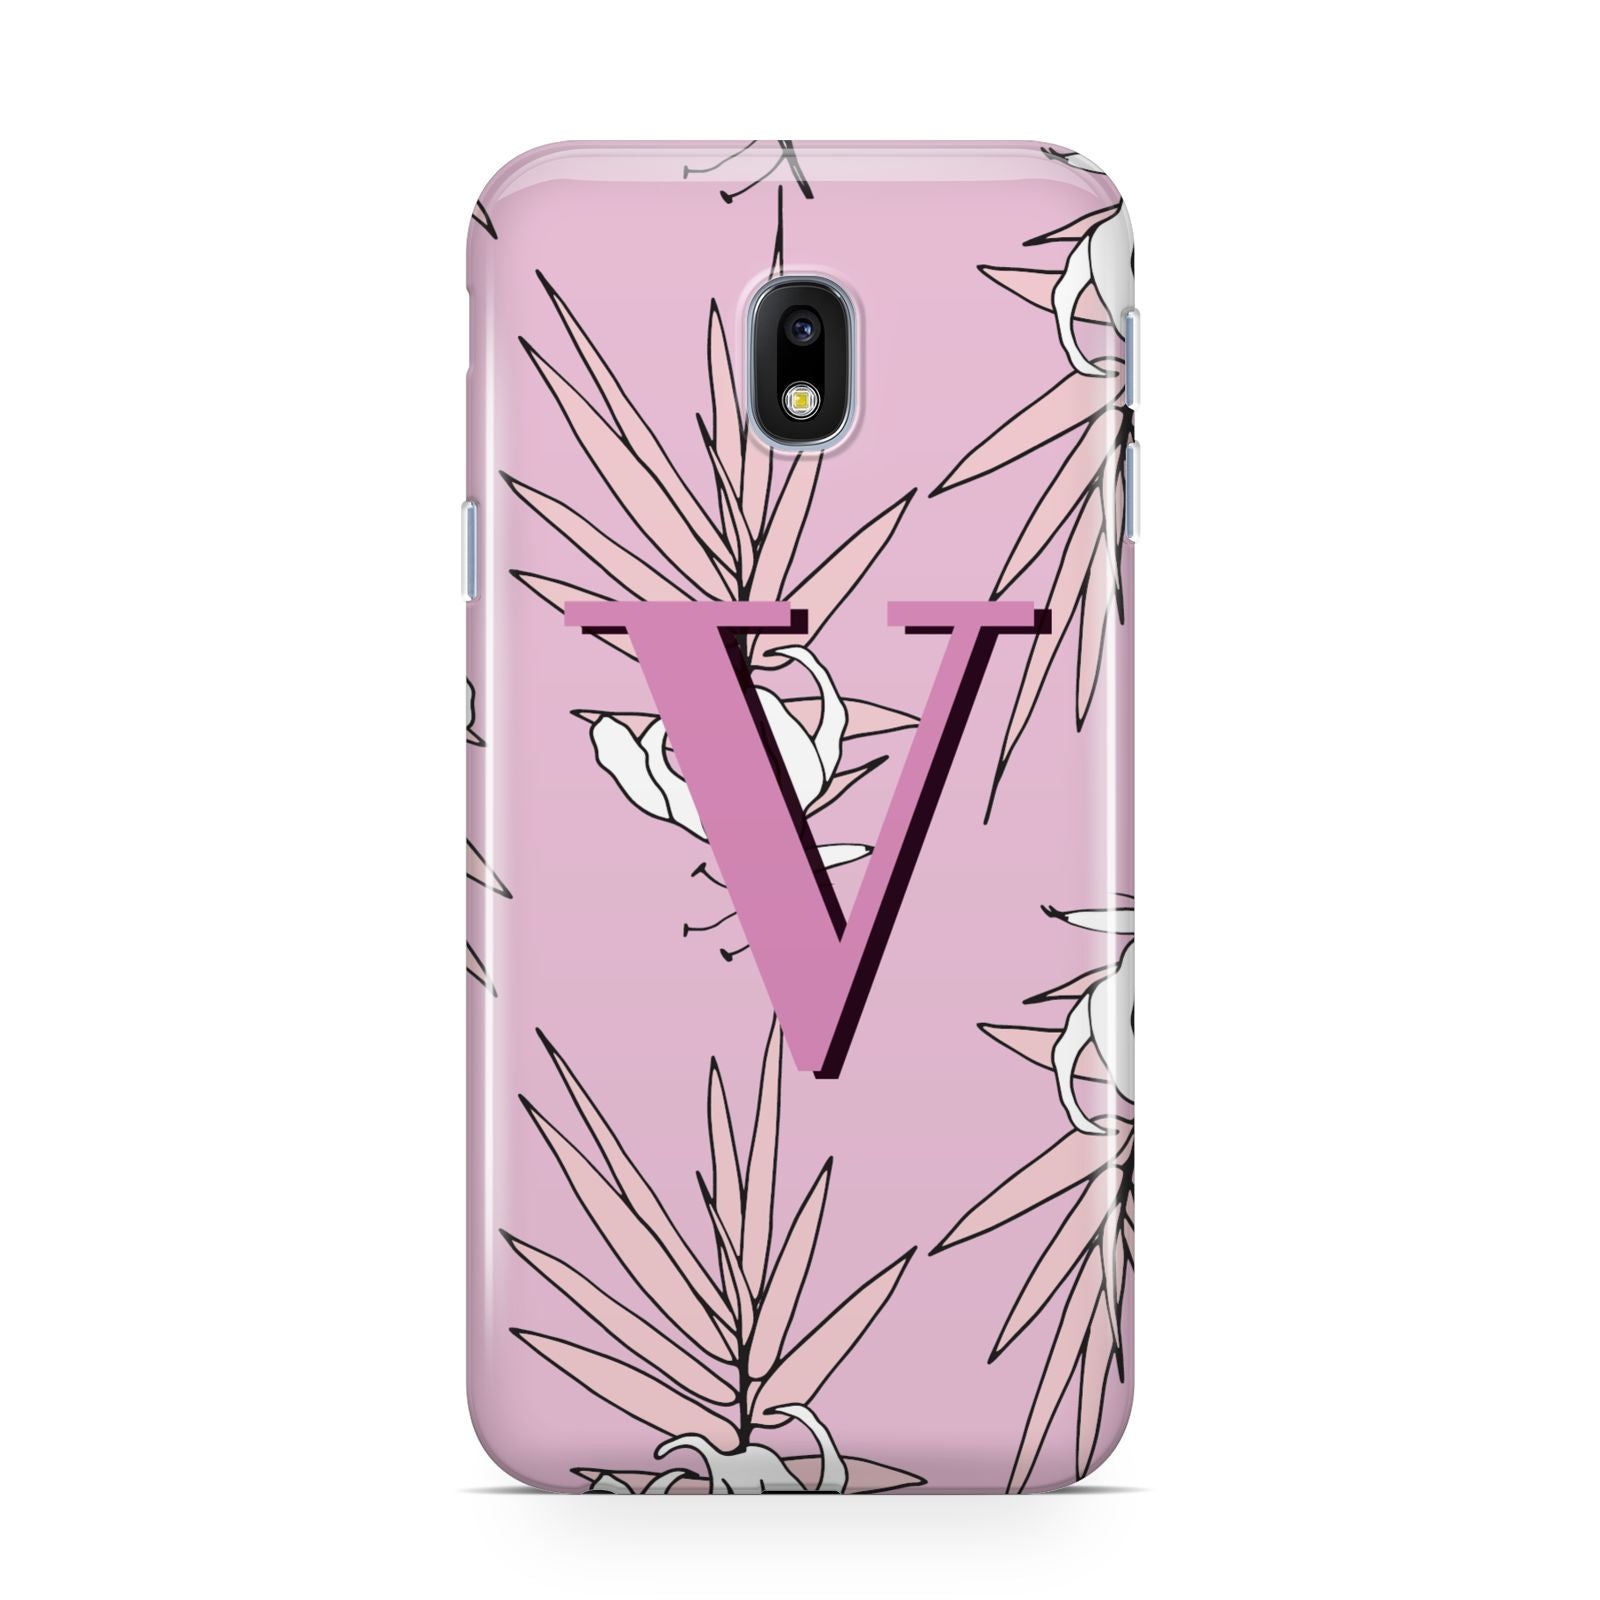 Personalised Pink and White Floral Monogram Samsung Galaxy J3 2017 Case